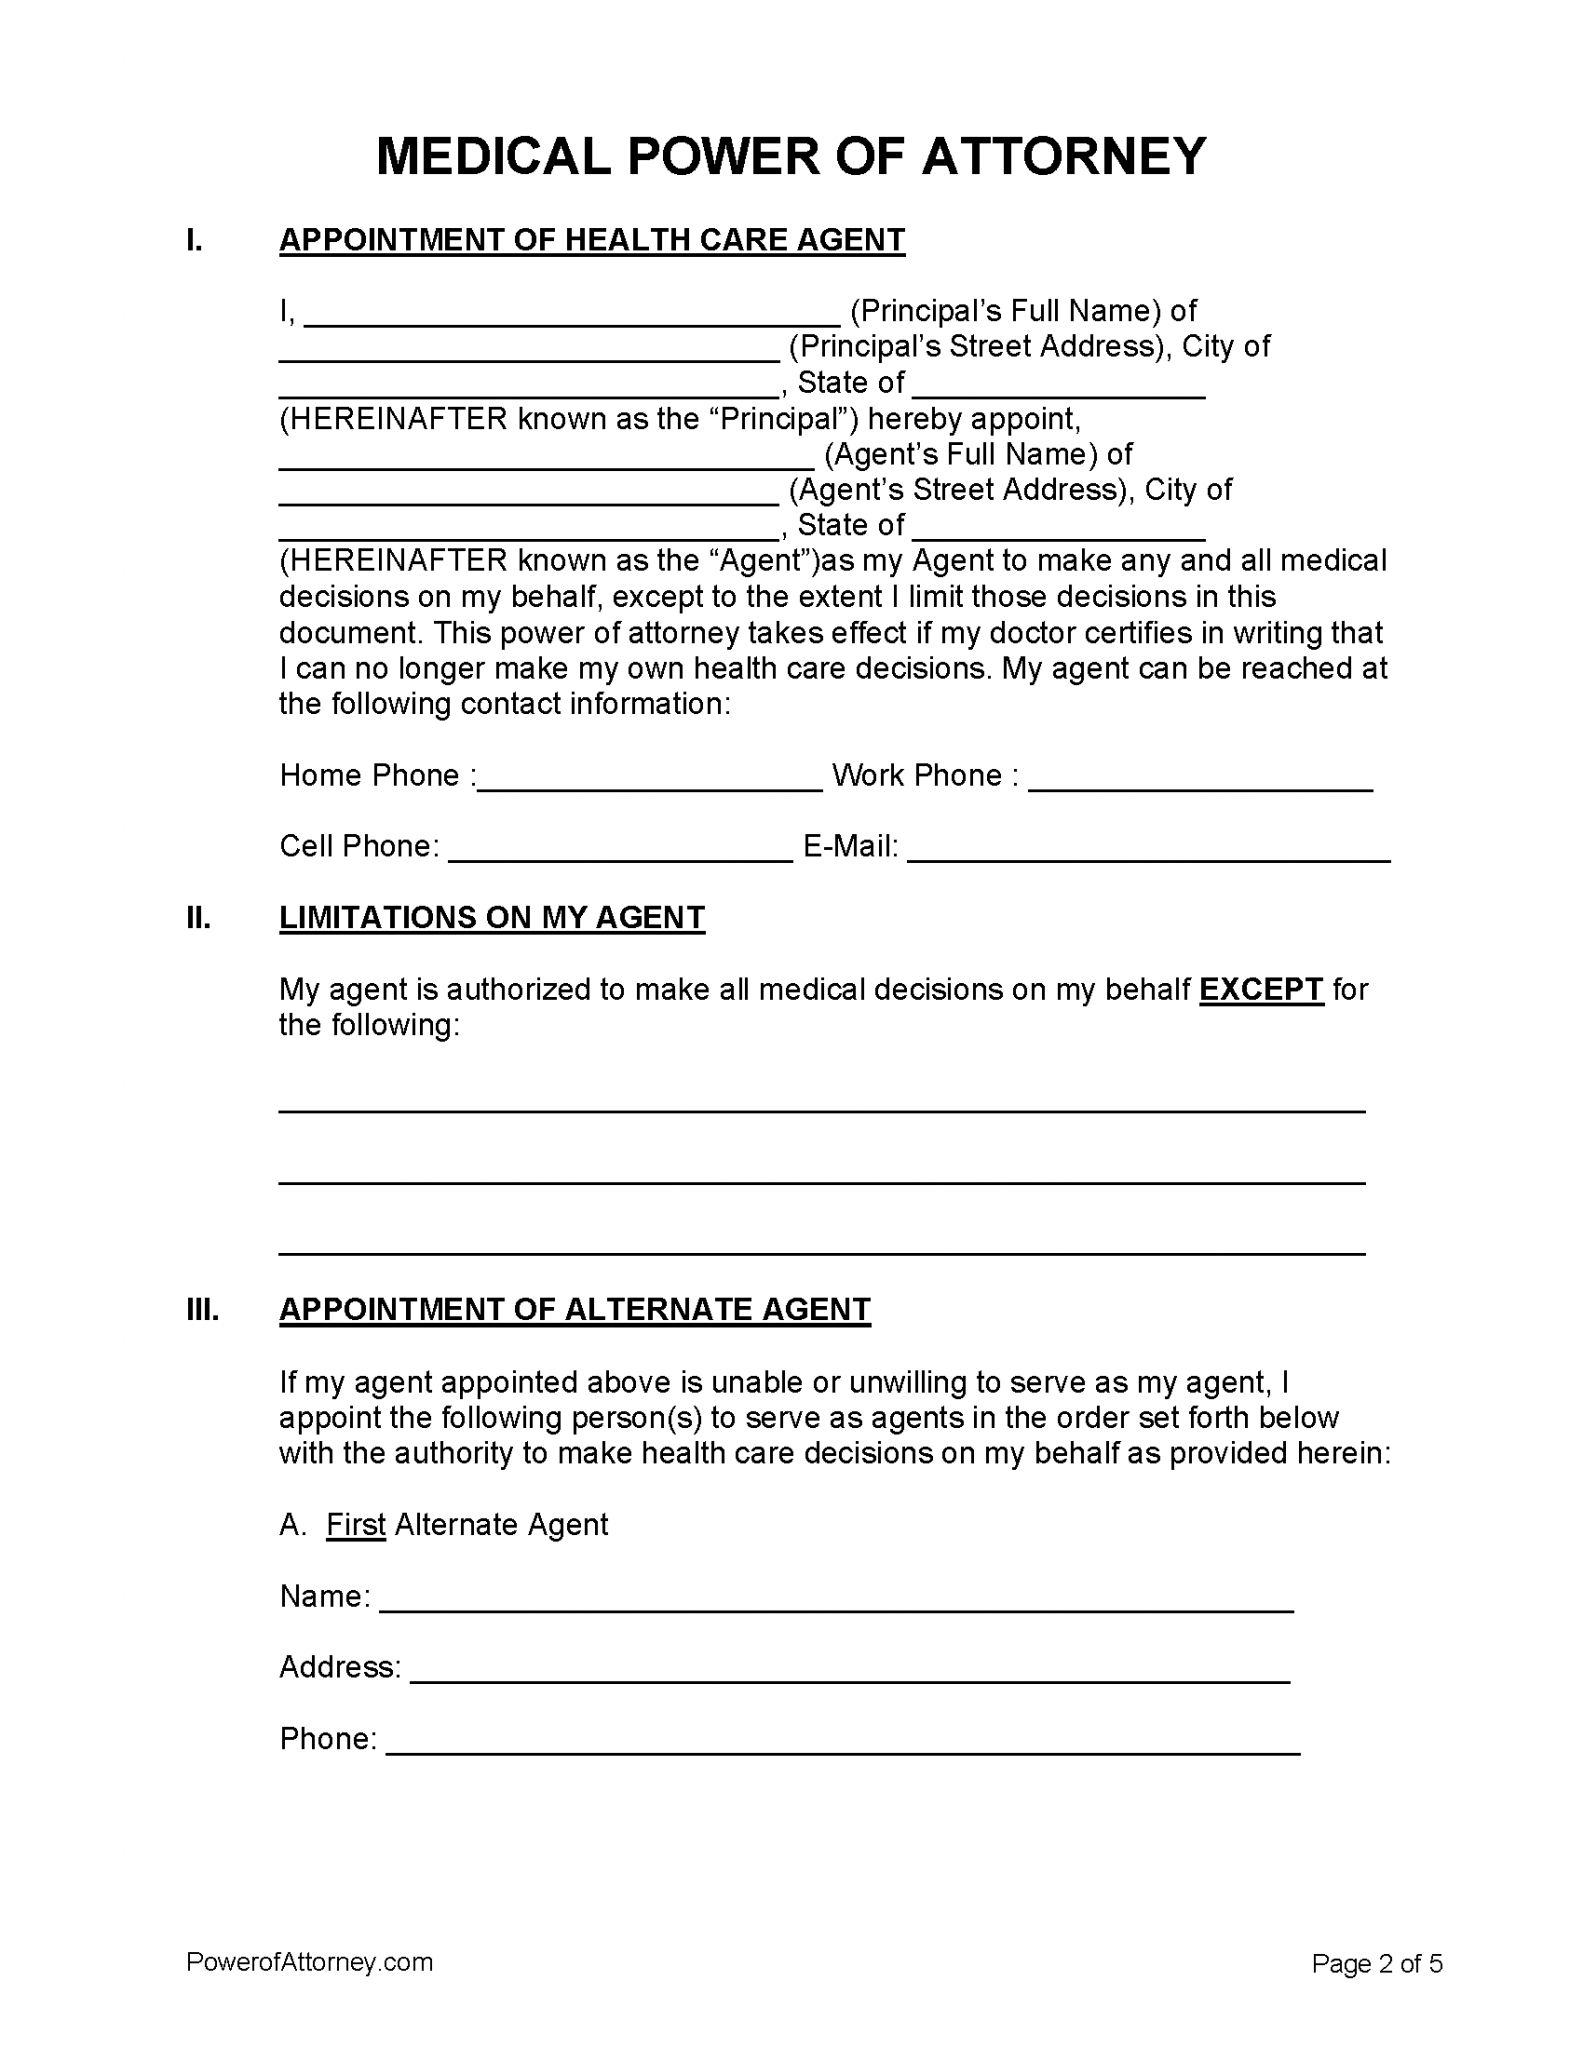 New Mexico Medical Power Of Attorney Forms